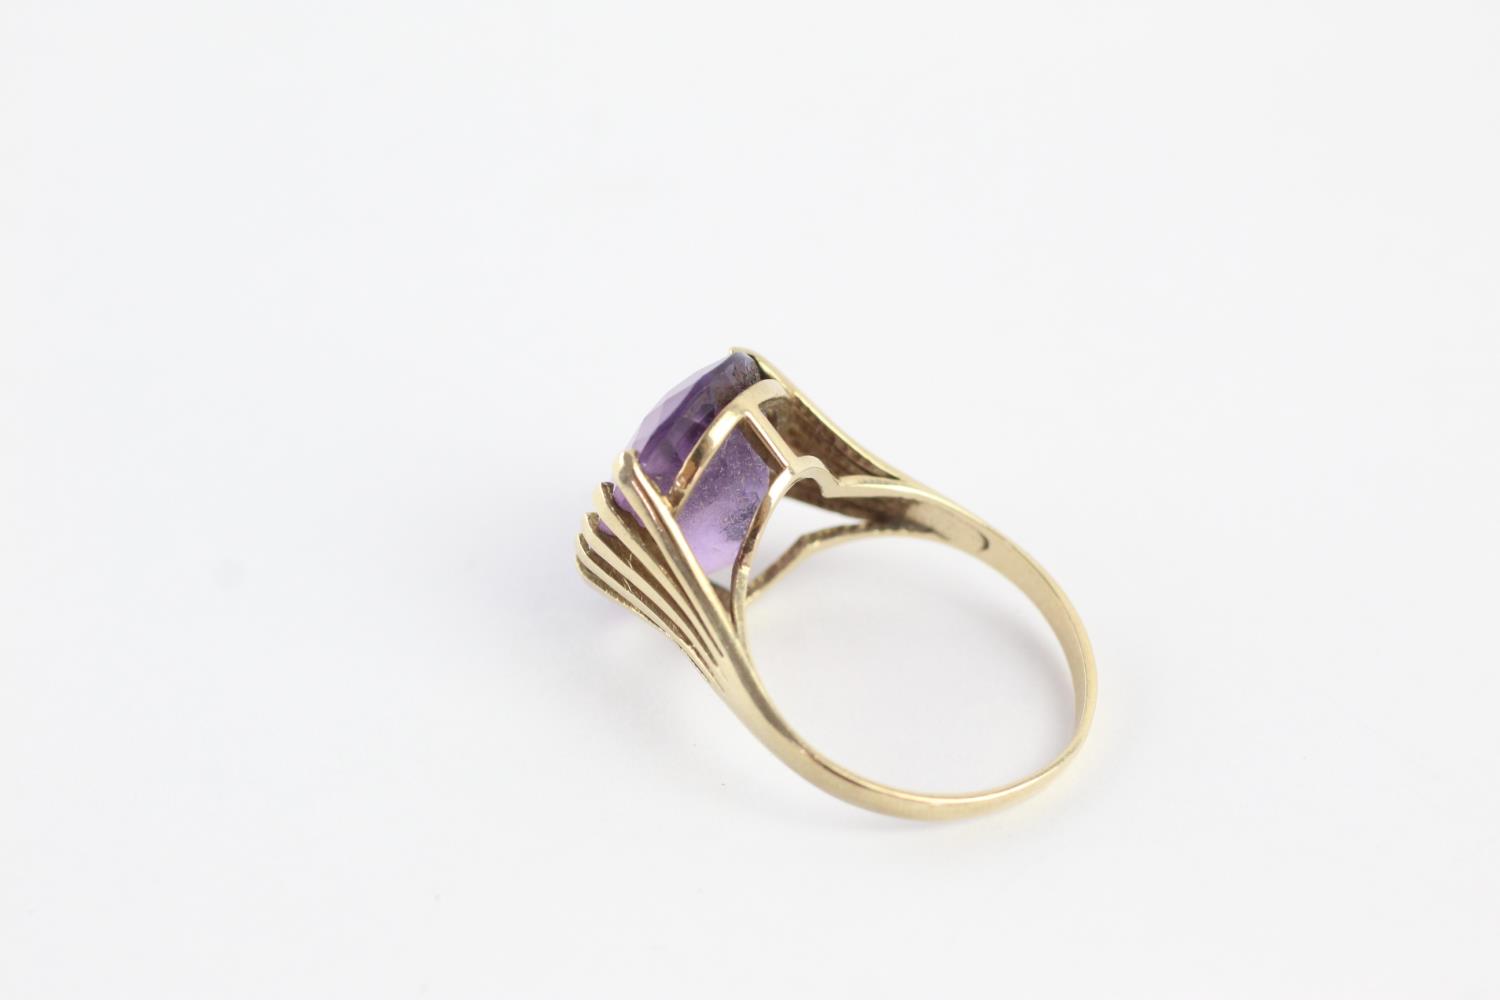 9ct gold amethyst high profile setting cocktail ring (3.8g) size O - Image 8 of 9